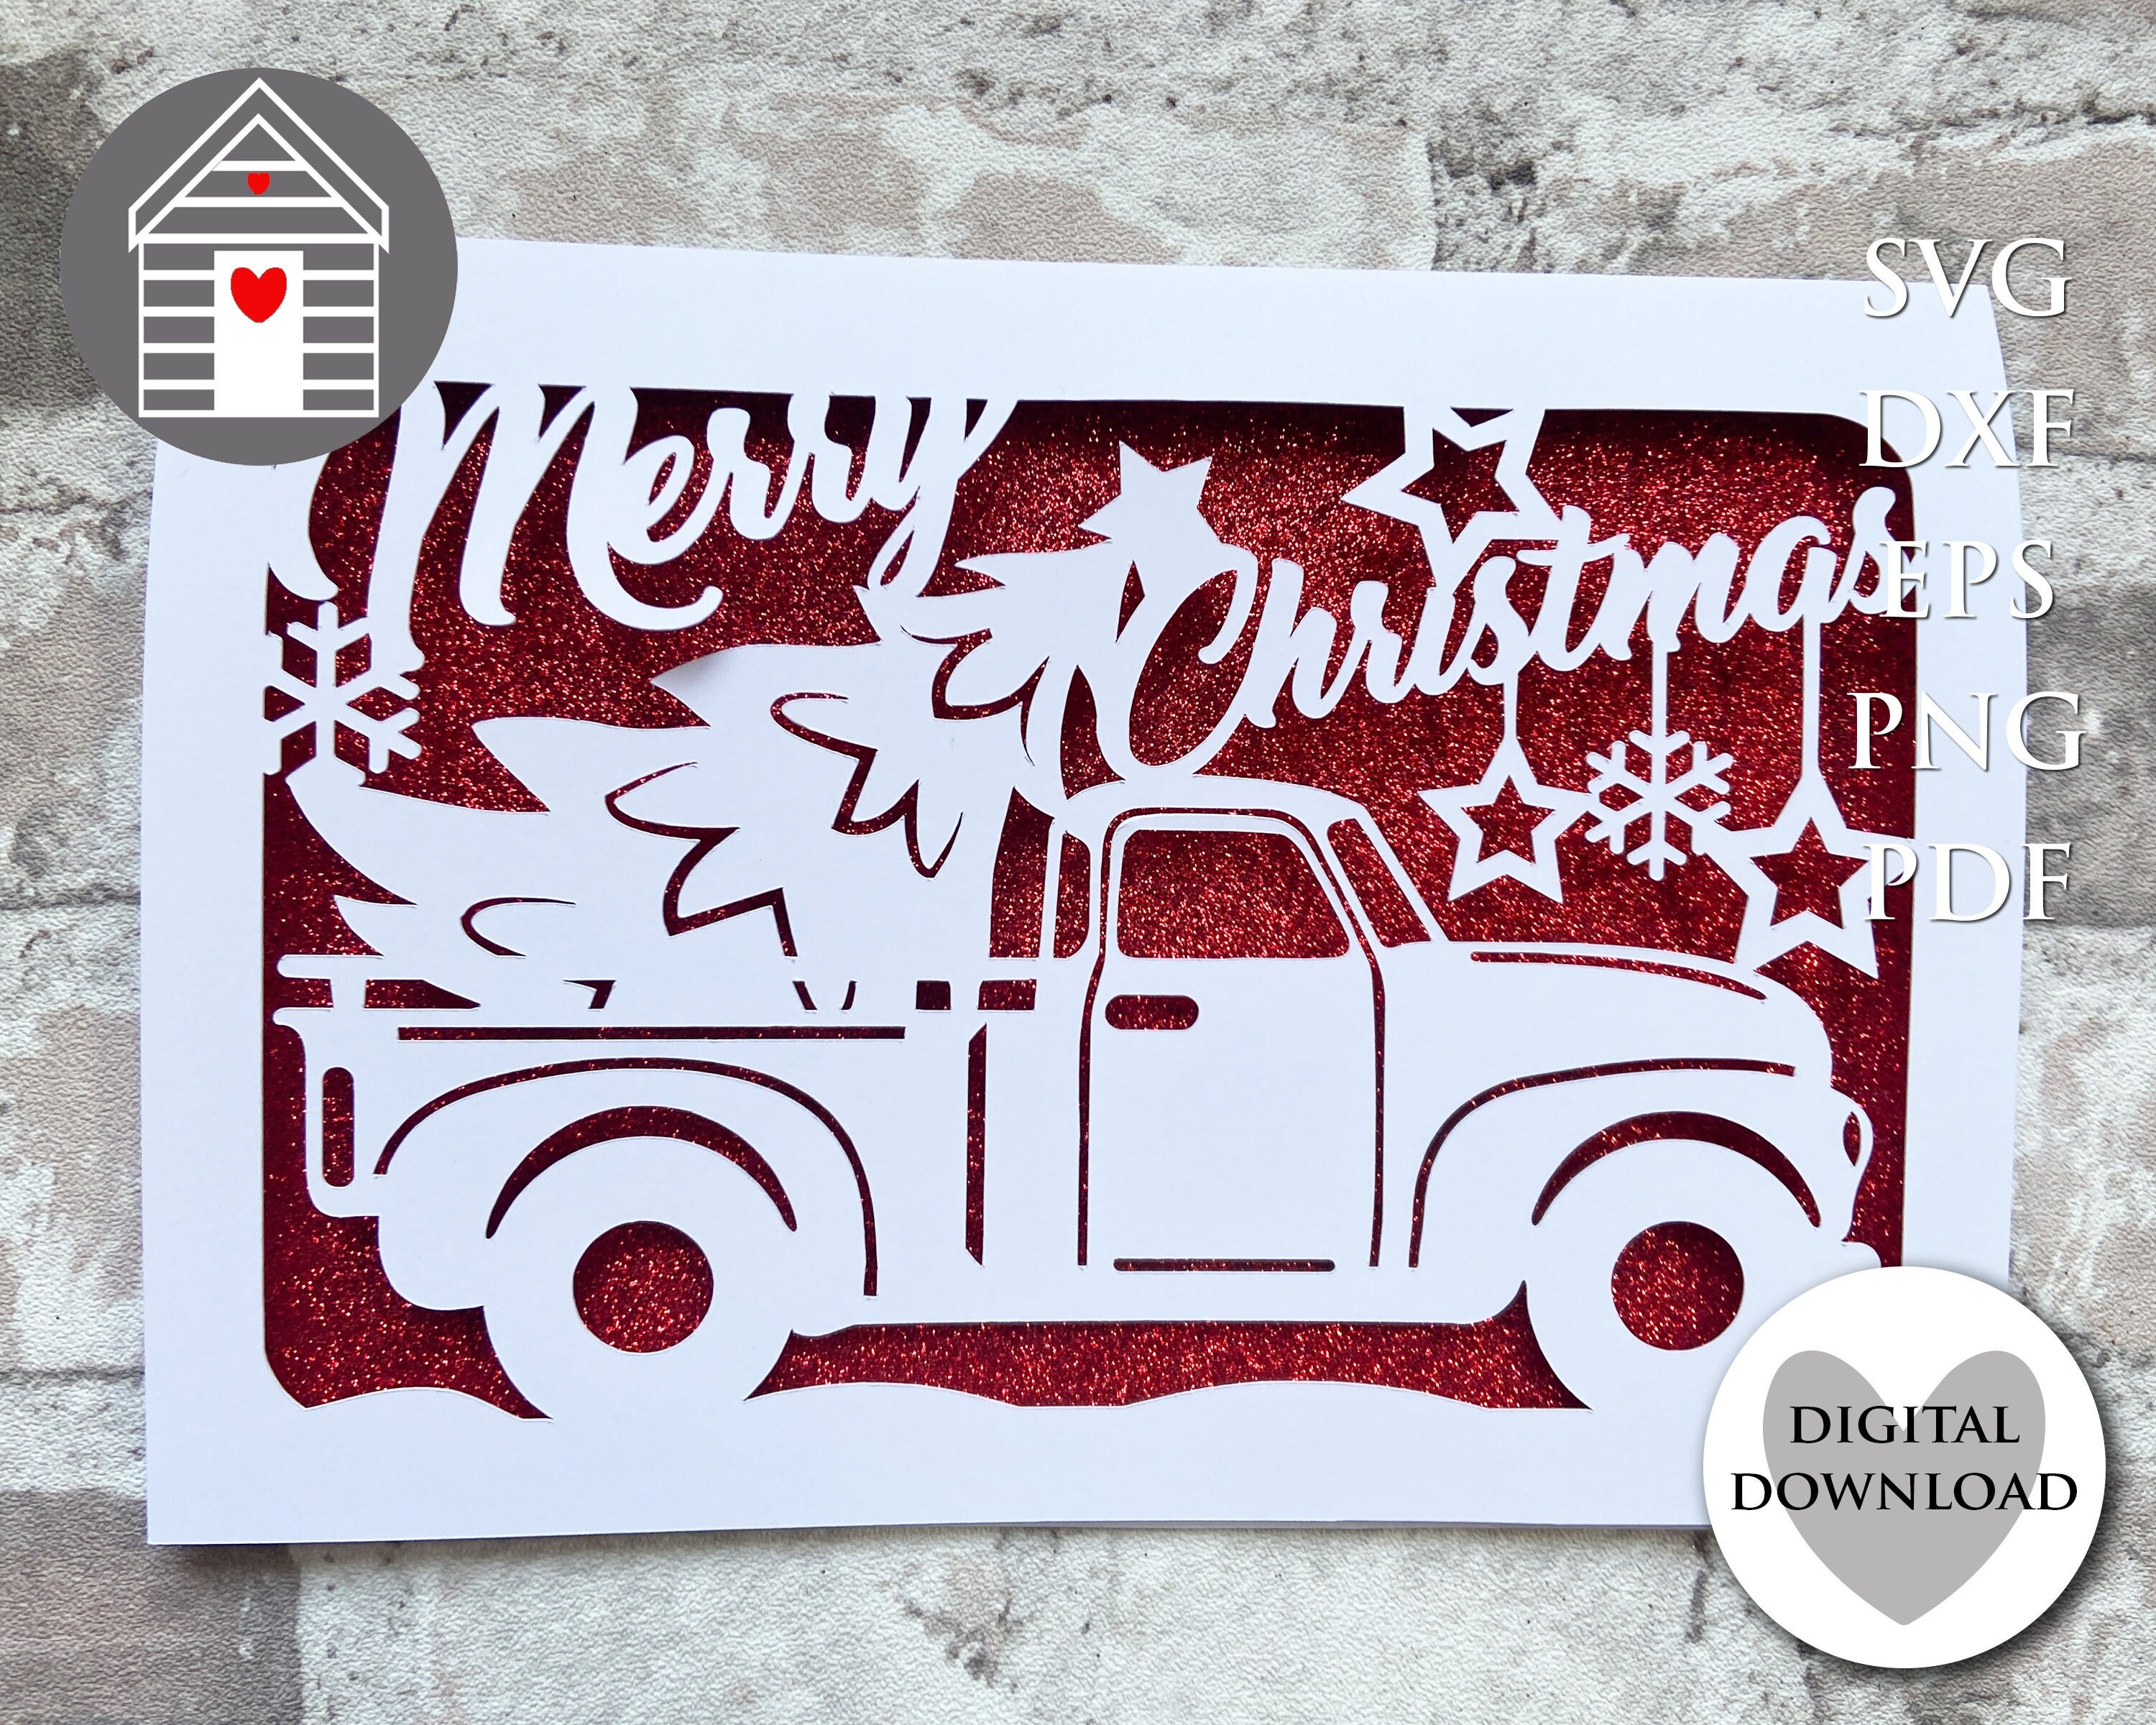 SVG Merry Christmas Truck Card Cut File -EPS - Png - Dxf - Pdf file - DIY Farmhouse Design for Cricut & cutting machines - Make Your Own